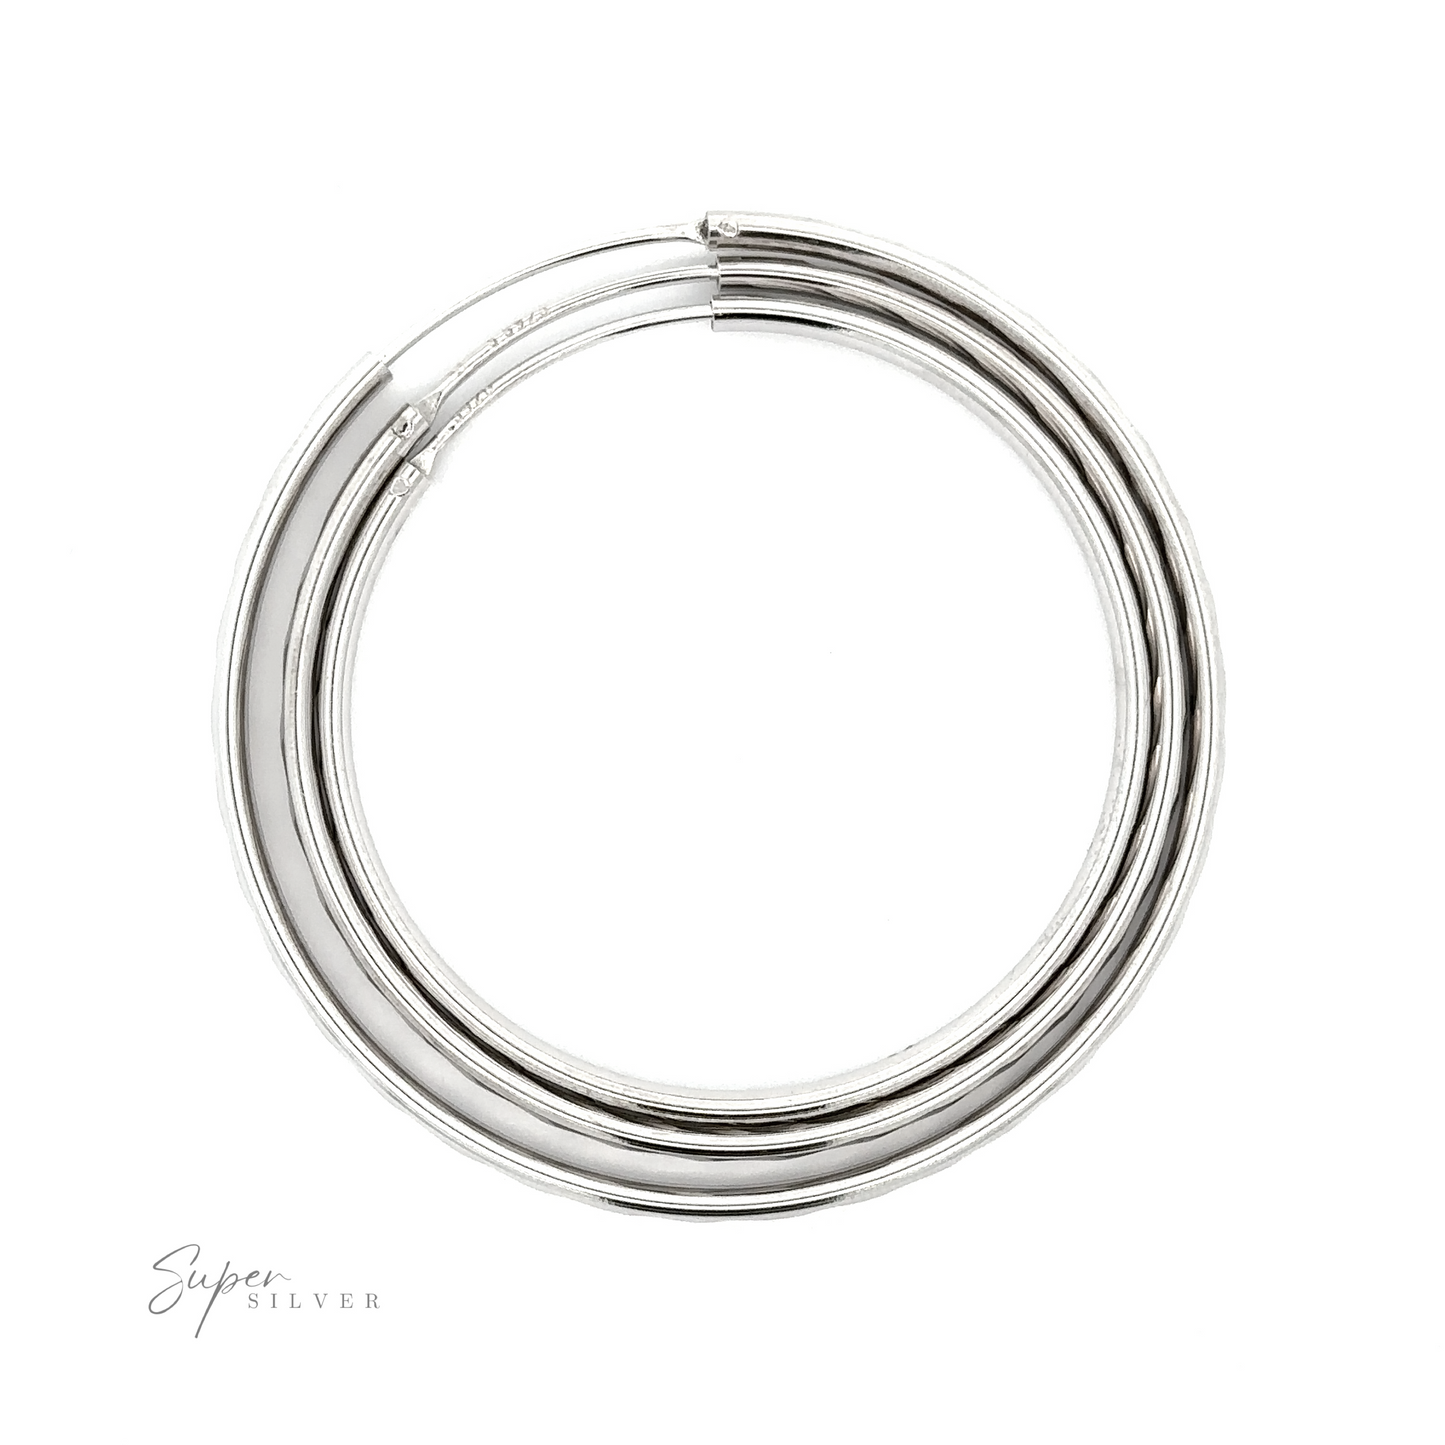 
                  
                    Three intertwined 3mm Chevron Faceted Hoops bangle bracelets on a white background, with a visible hinge and clasp, the brand "super silver" inscribed at the bottom.
                  
                